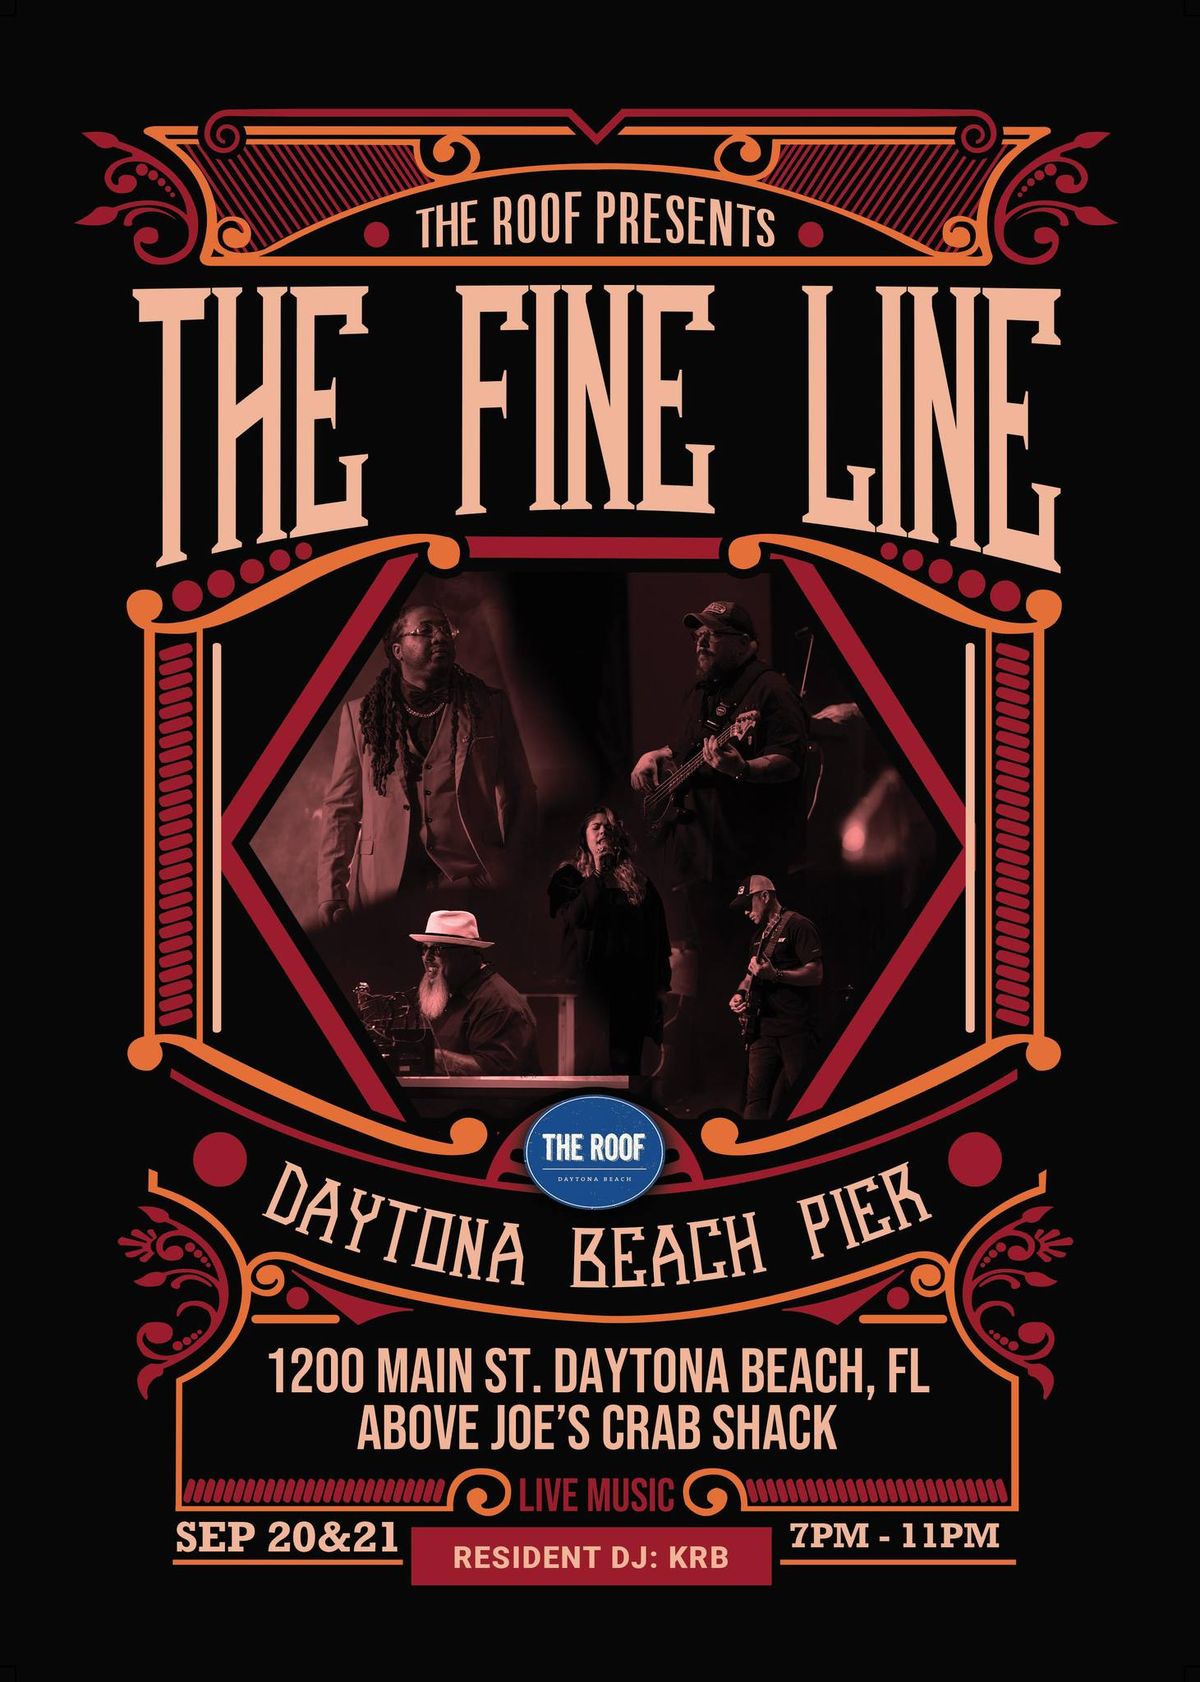 The Fine Line @ The ROOF, Daytona Beach Pier! September 20th and 21st!